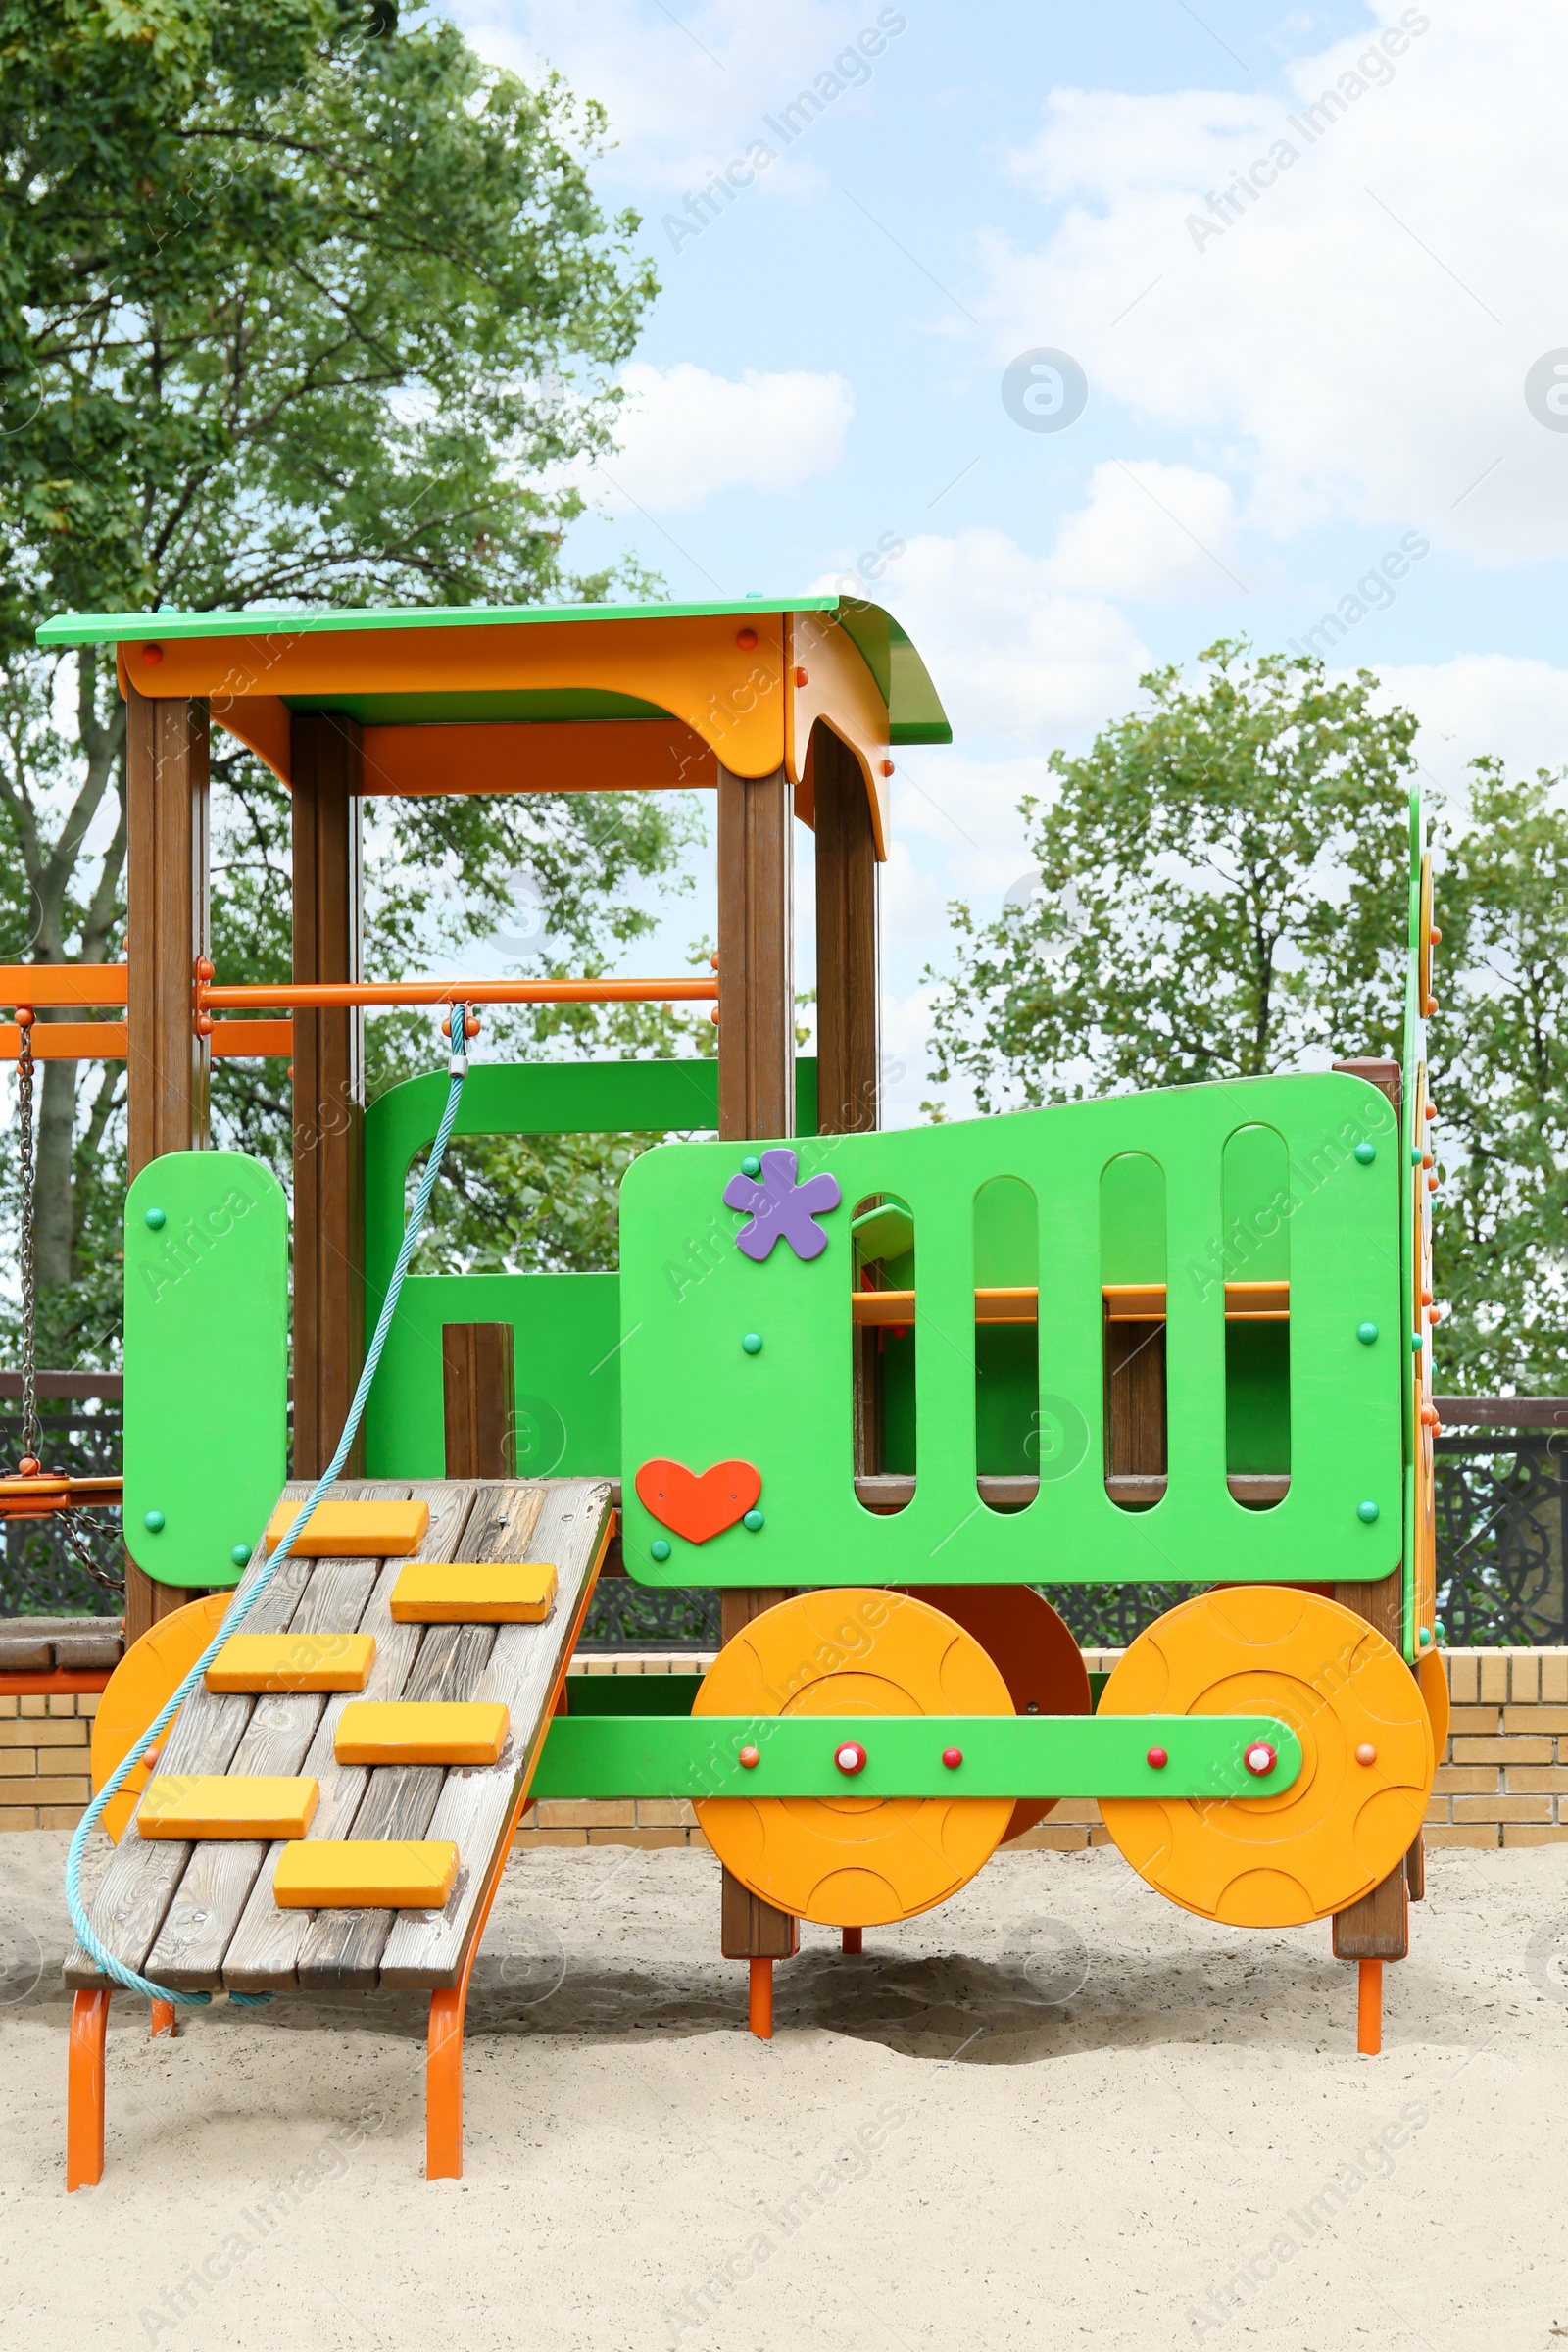 Photo of Children's playground with new colorful train playset